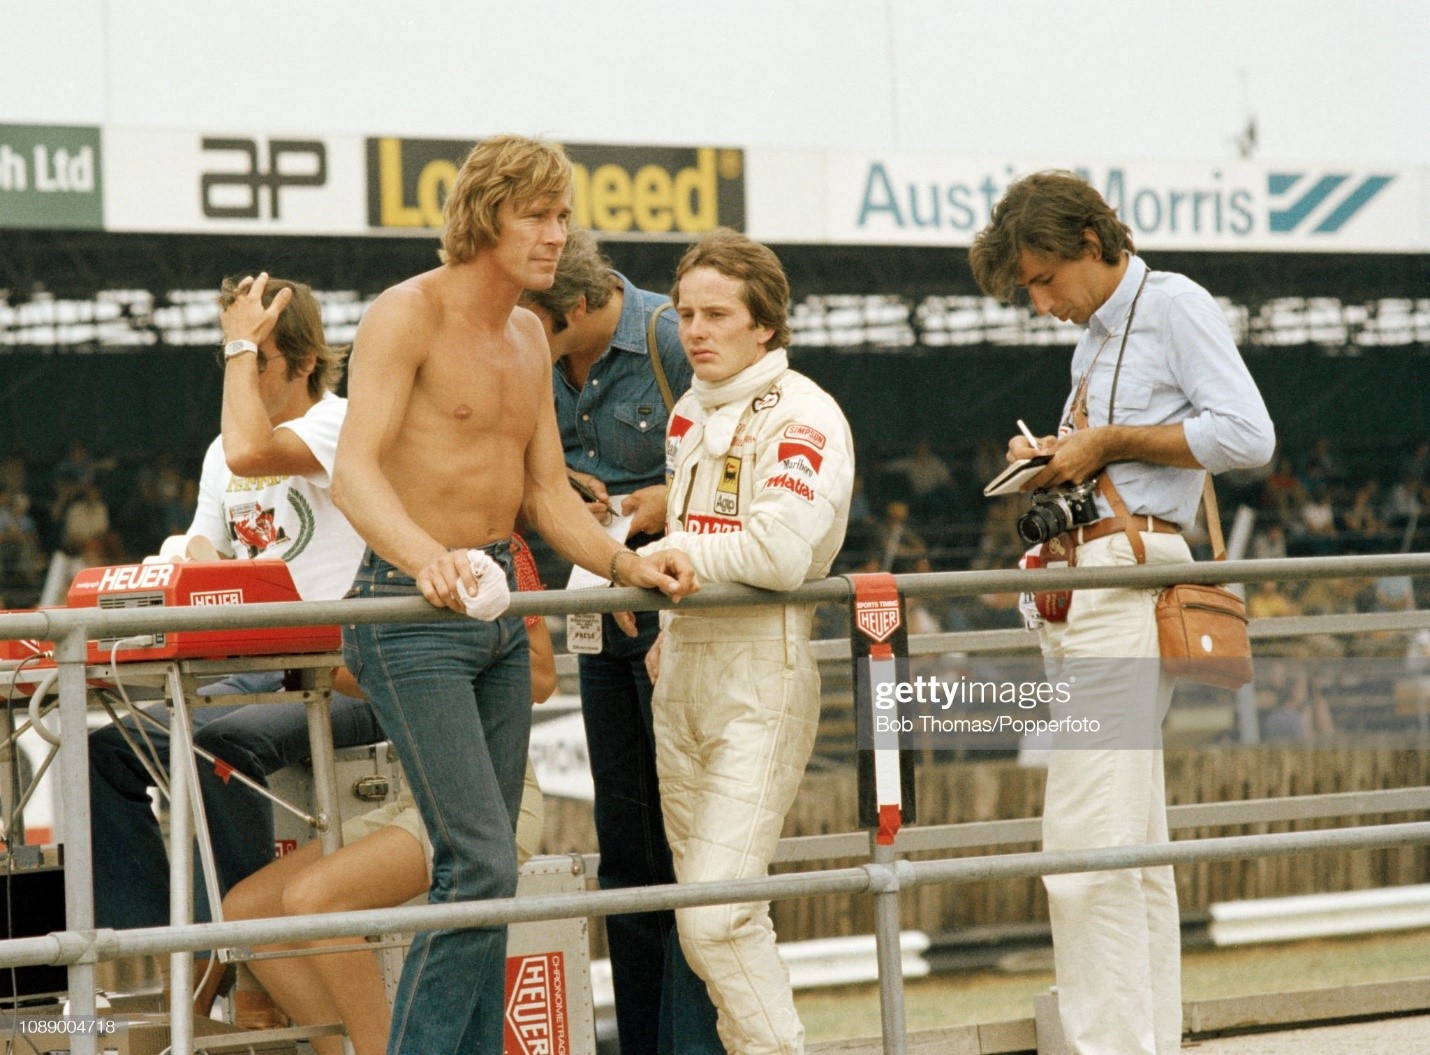 James Hunt and Gilles Villeneuve on the pitwall during the British Grand Prix at the Silverstone Circuit in Northampton, England, on July 14, 1979. 